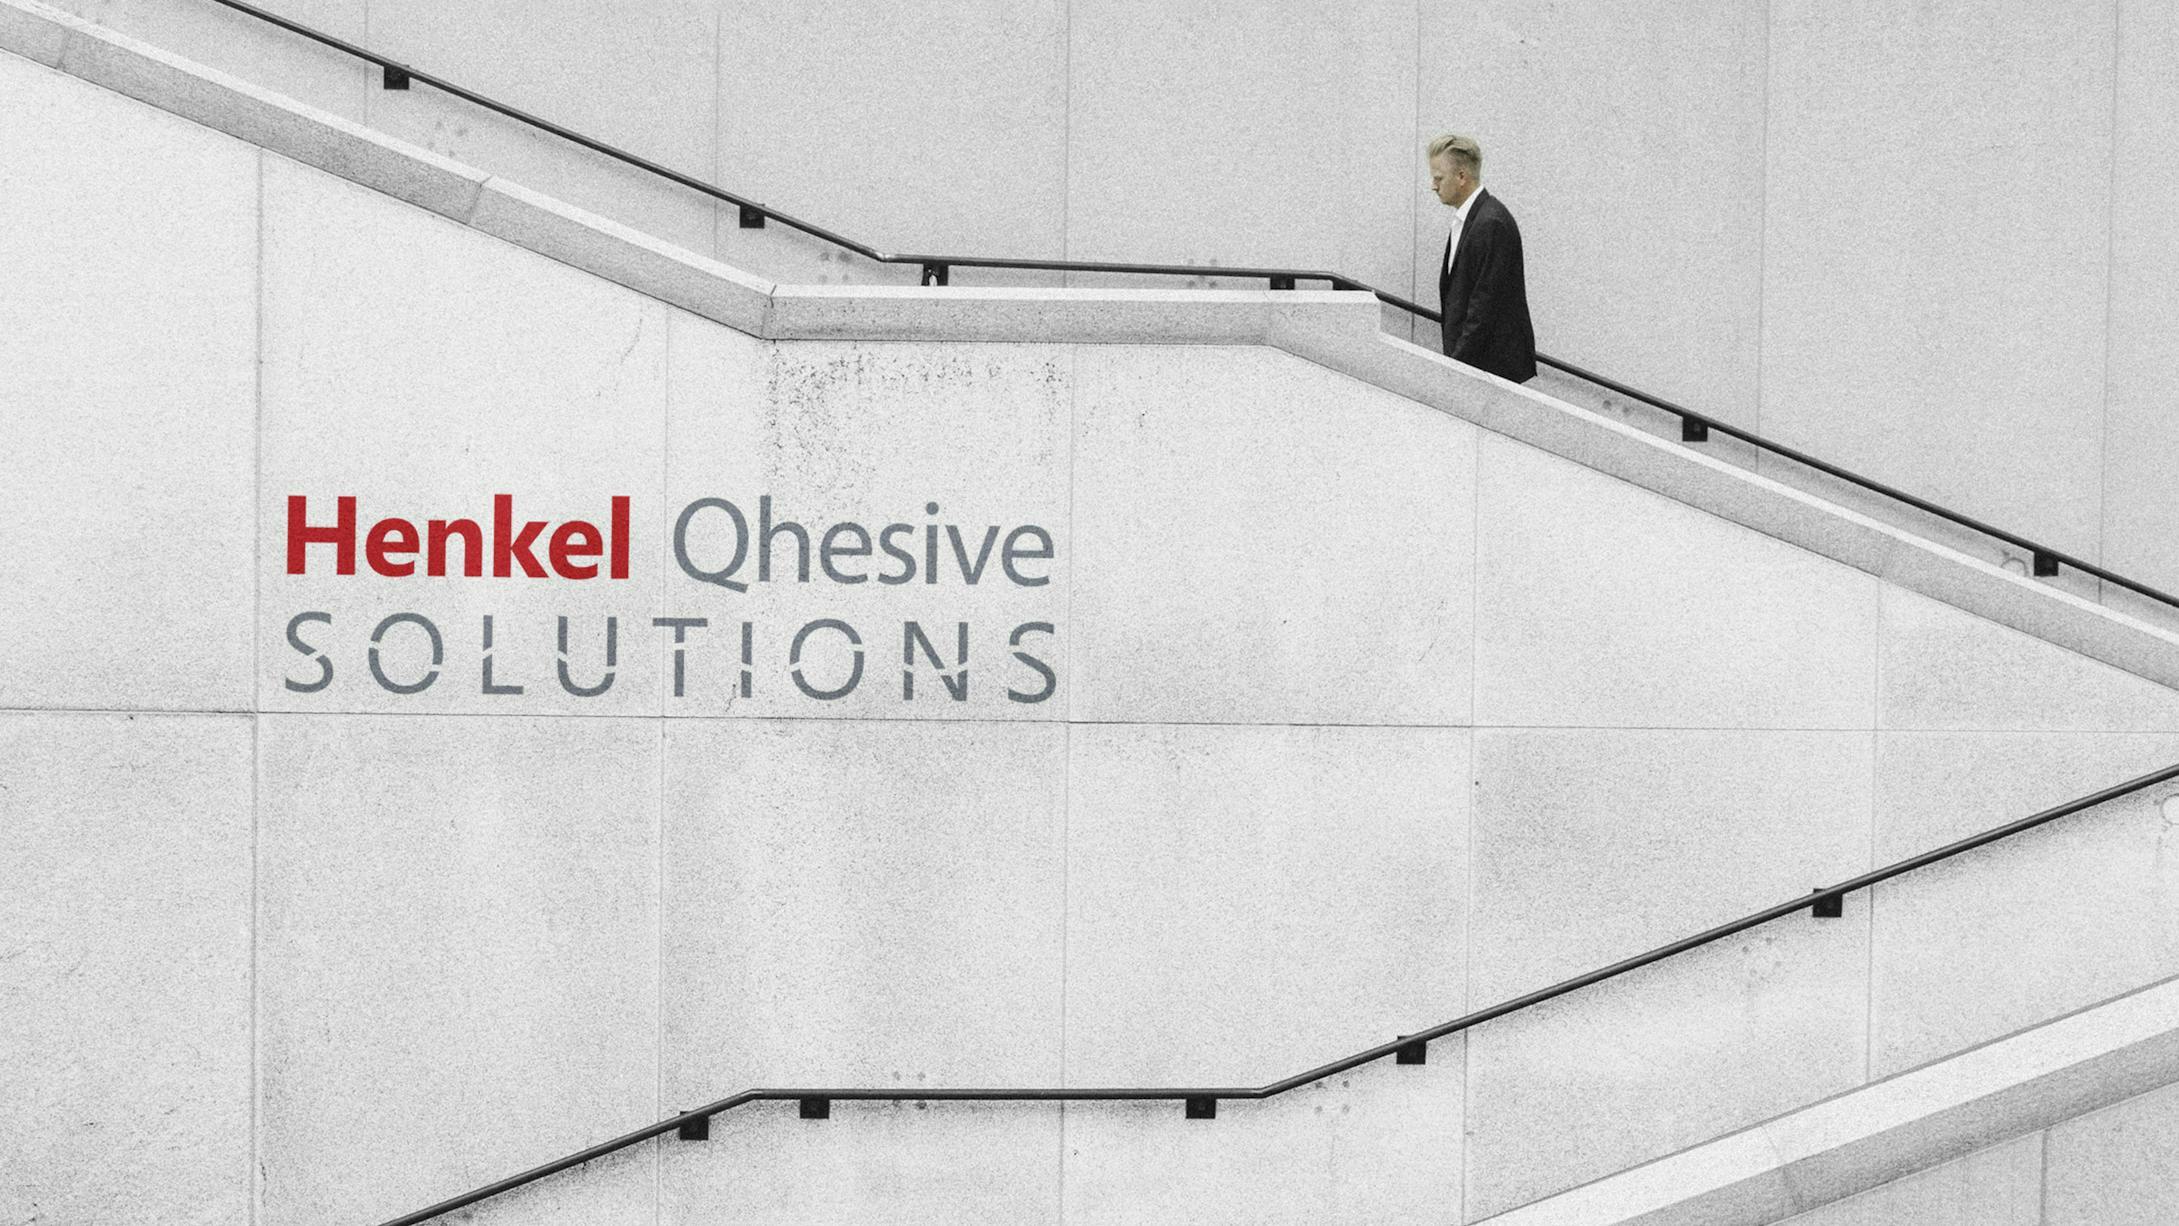 A man walking up stairs with Henkel Qhesive Solutions logo on the wall